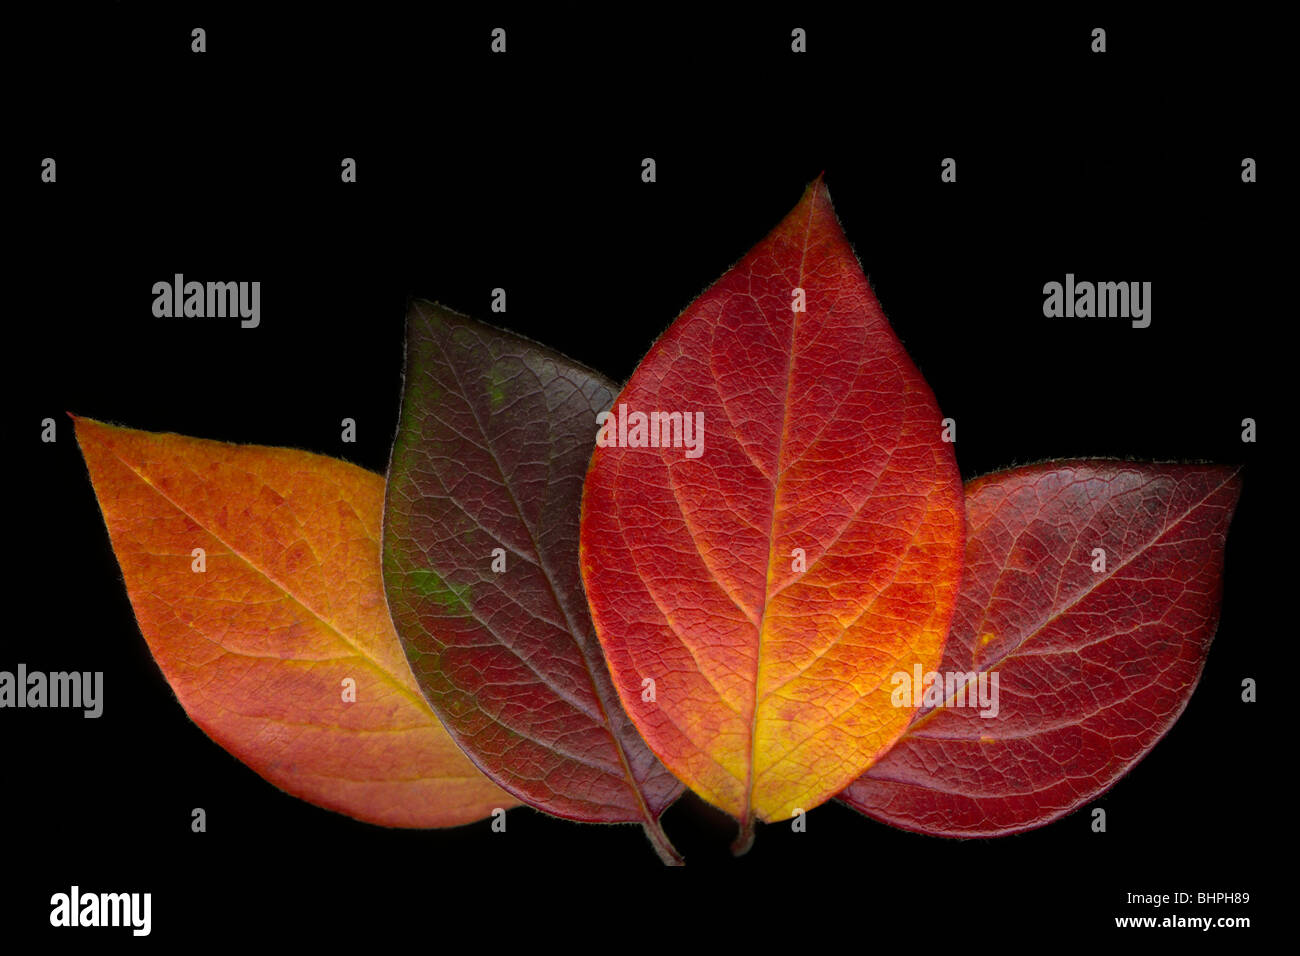 Group of 4 brightly colored fall cotoneaster leaves on black background with copy space Stock Photo